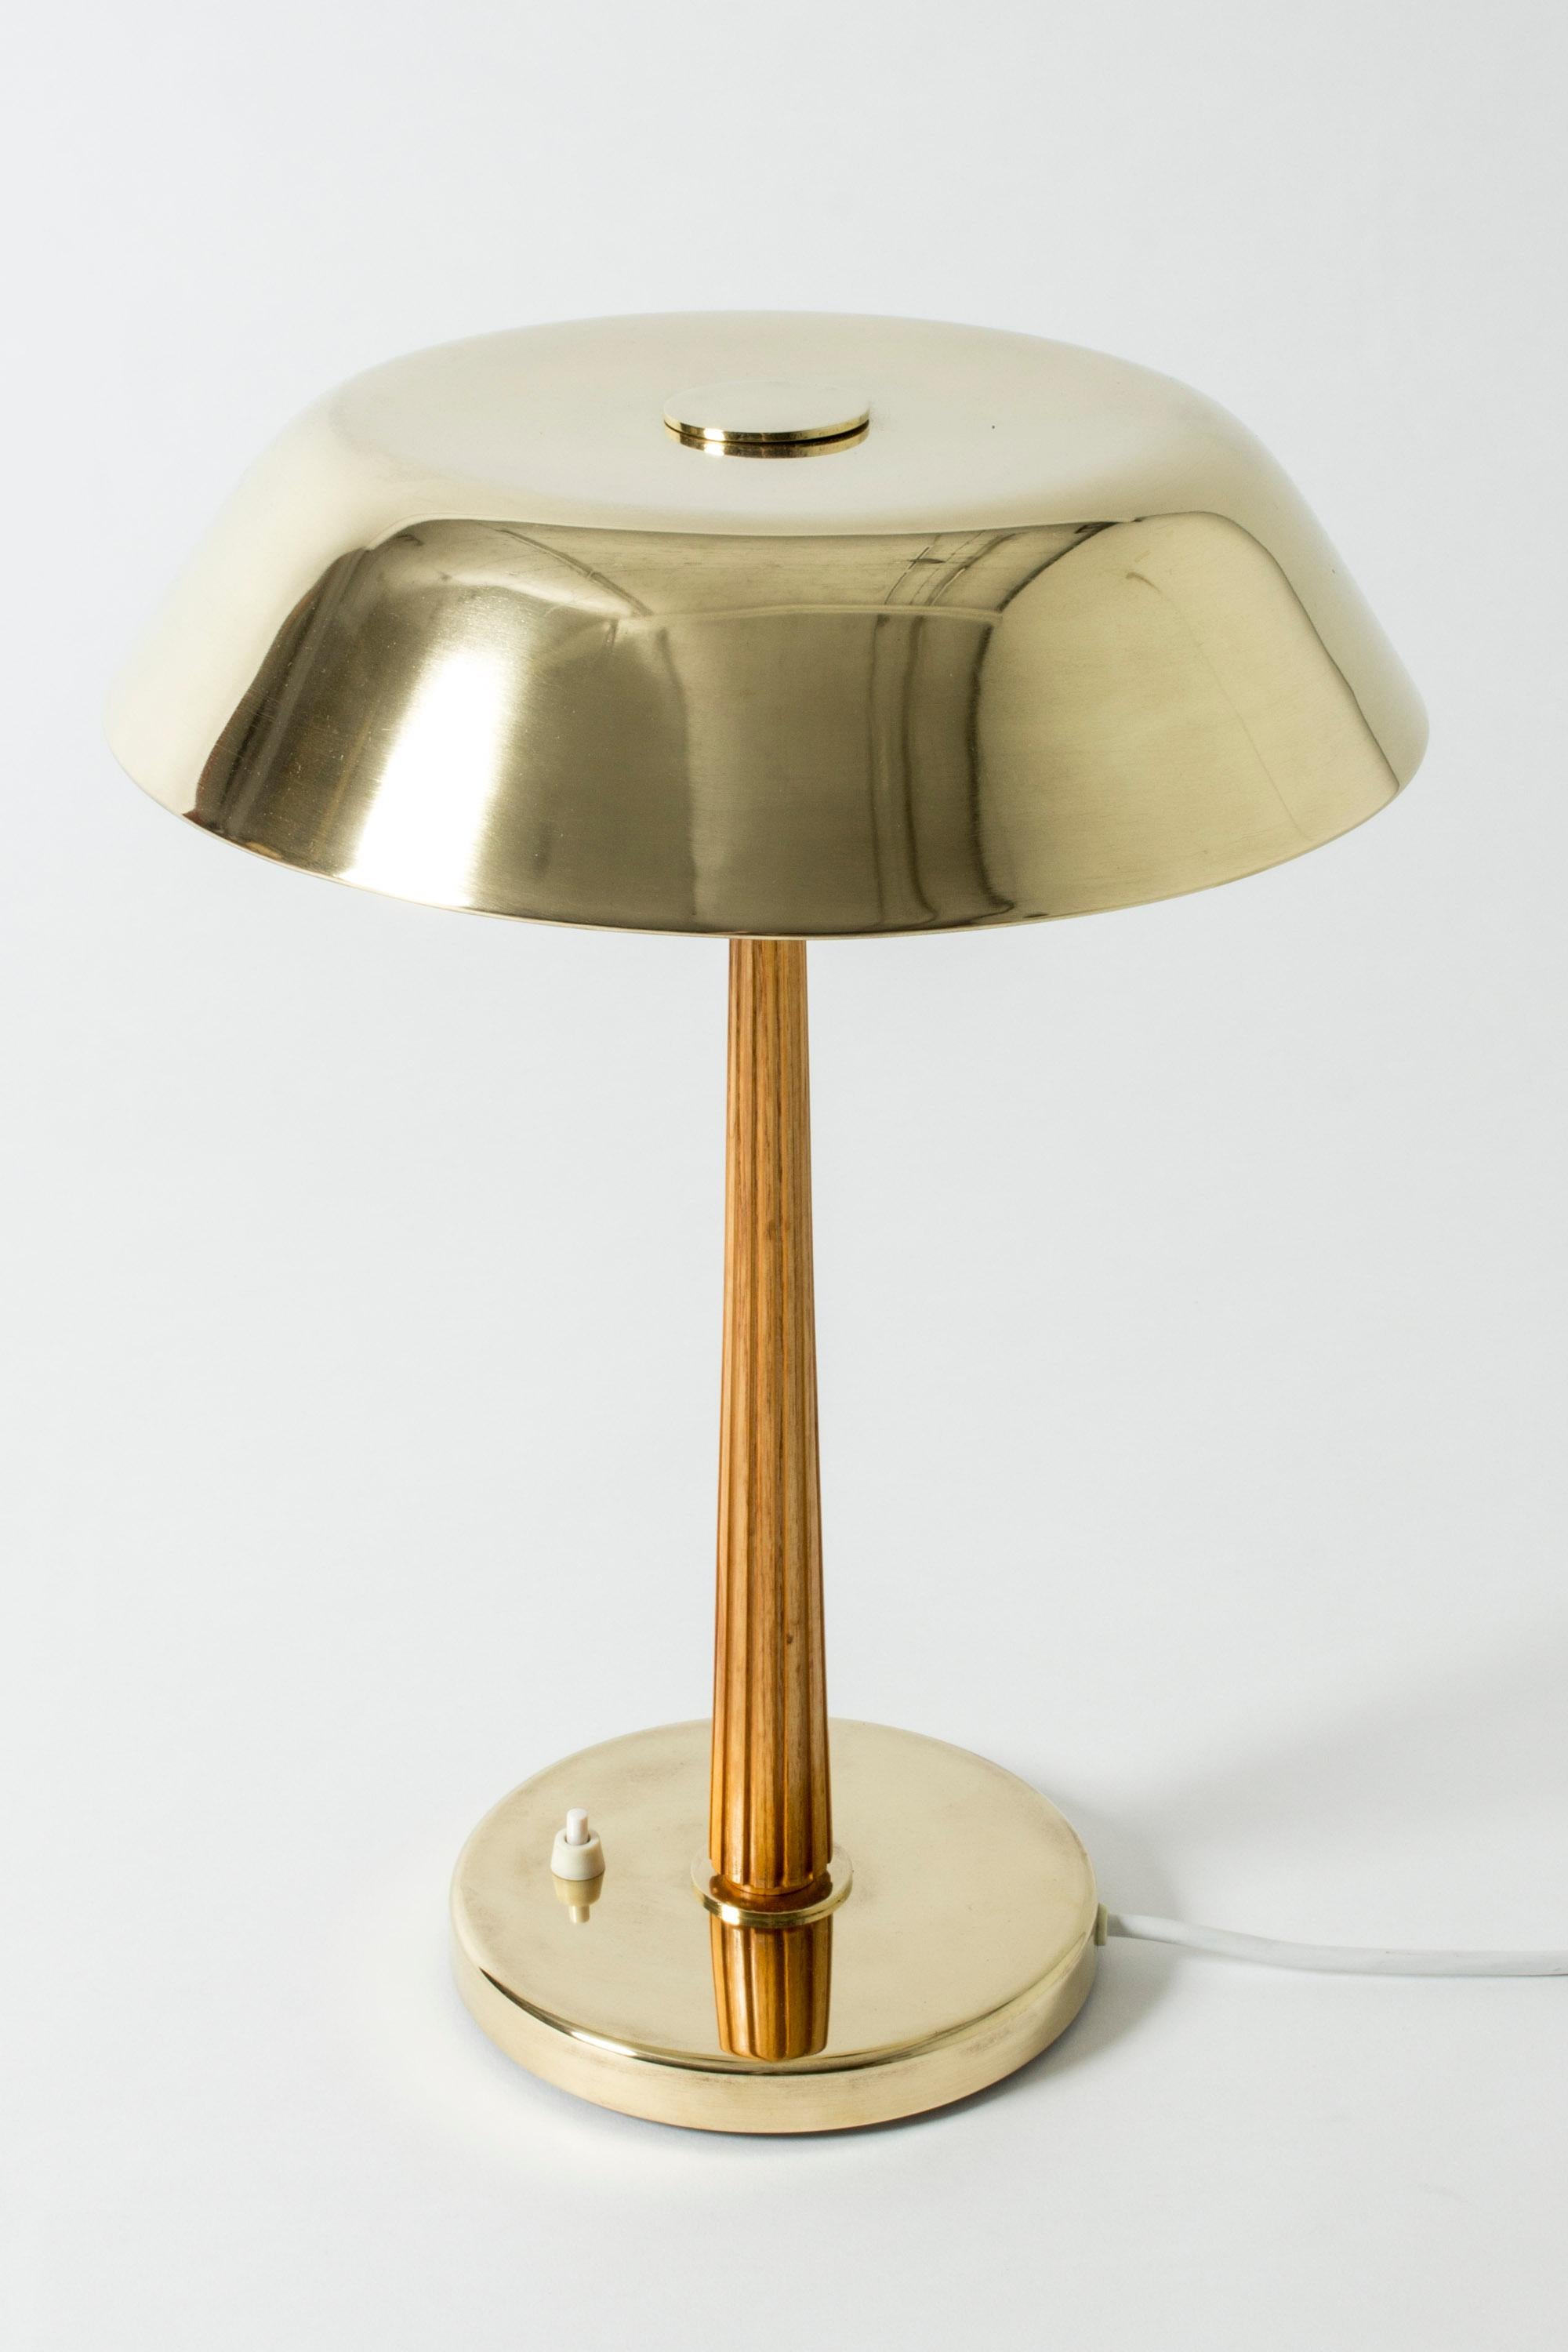 Elegant brass table lamp from Böhlmarks, with a smoothly rounded shade. Shade adorned with a sphere on top. Mahogany handle with embossed stripes.